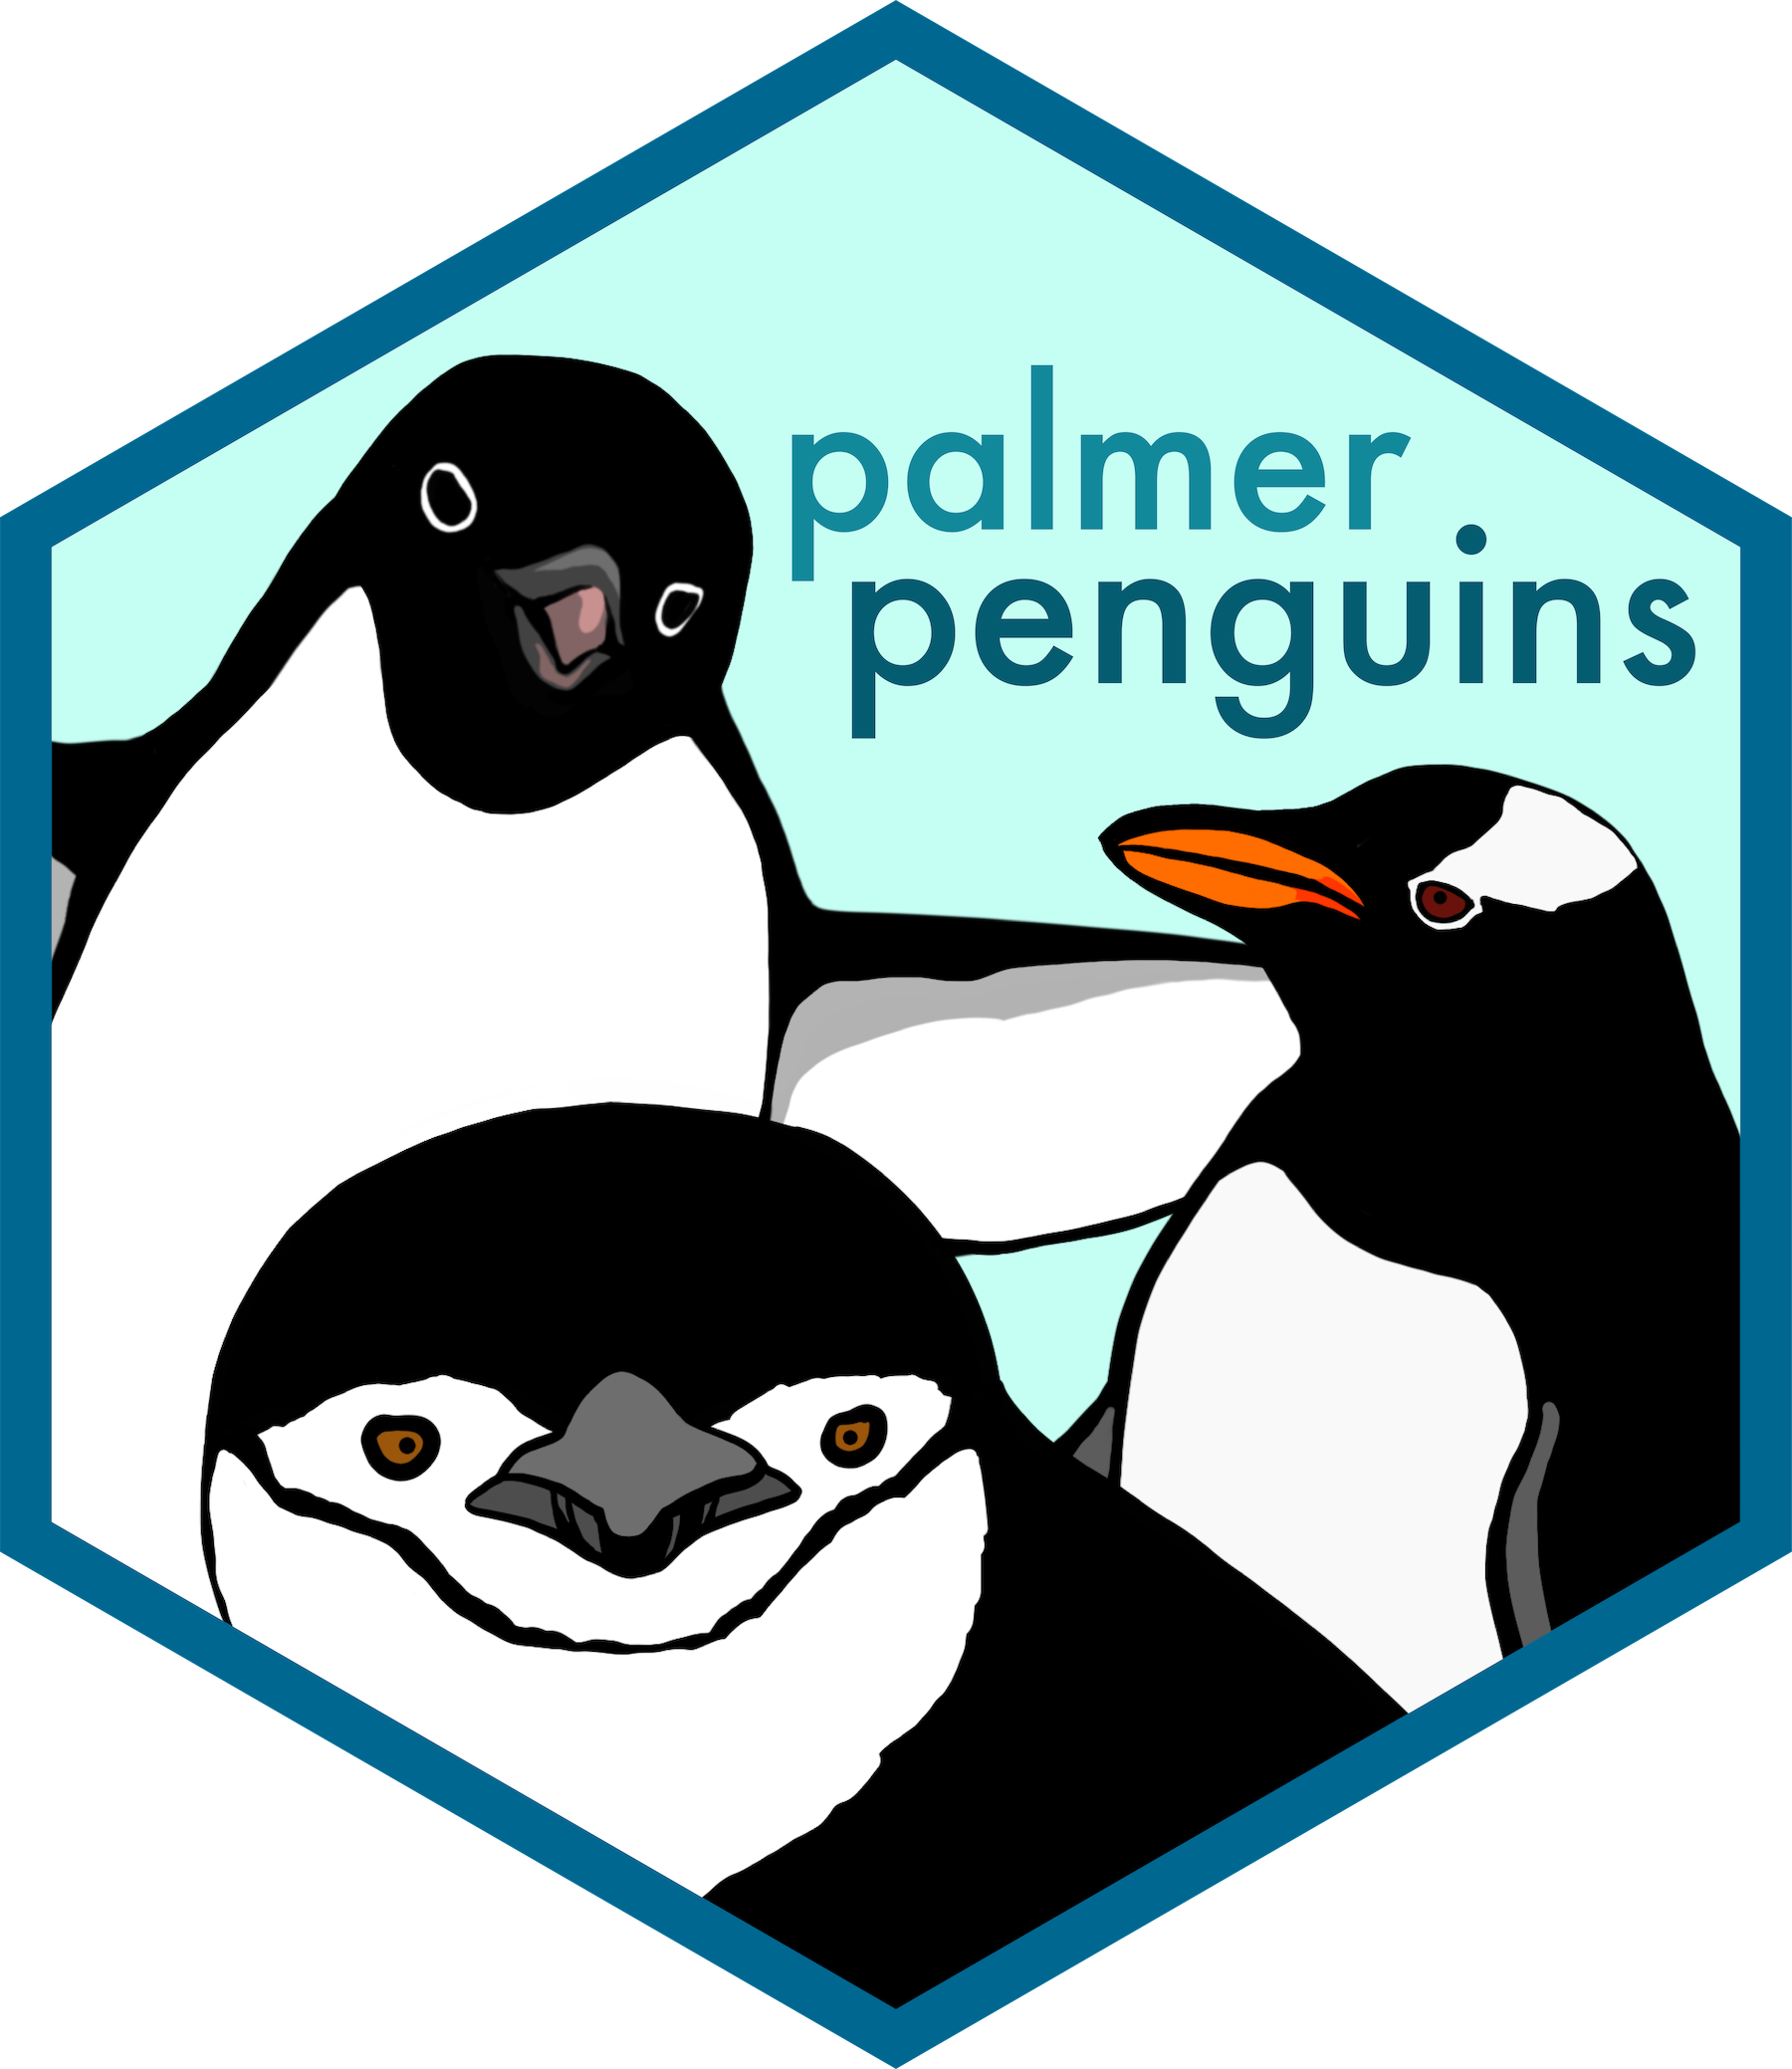 a hexagon sticker in blue with a picture of a 3 cute cartoon penguins that says 'palmer penguins'